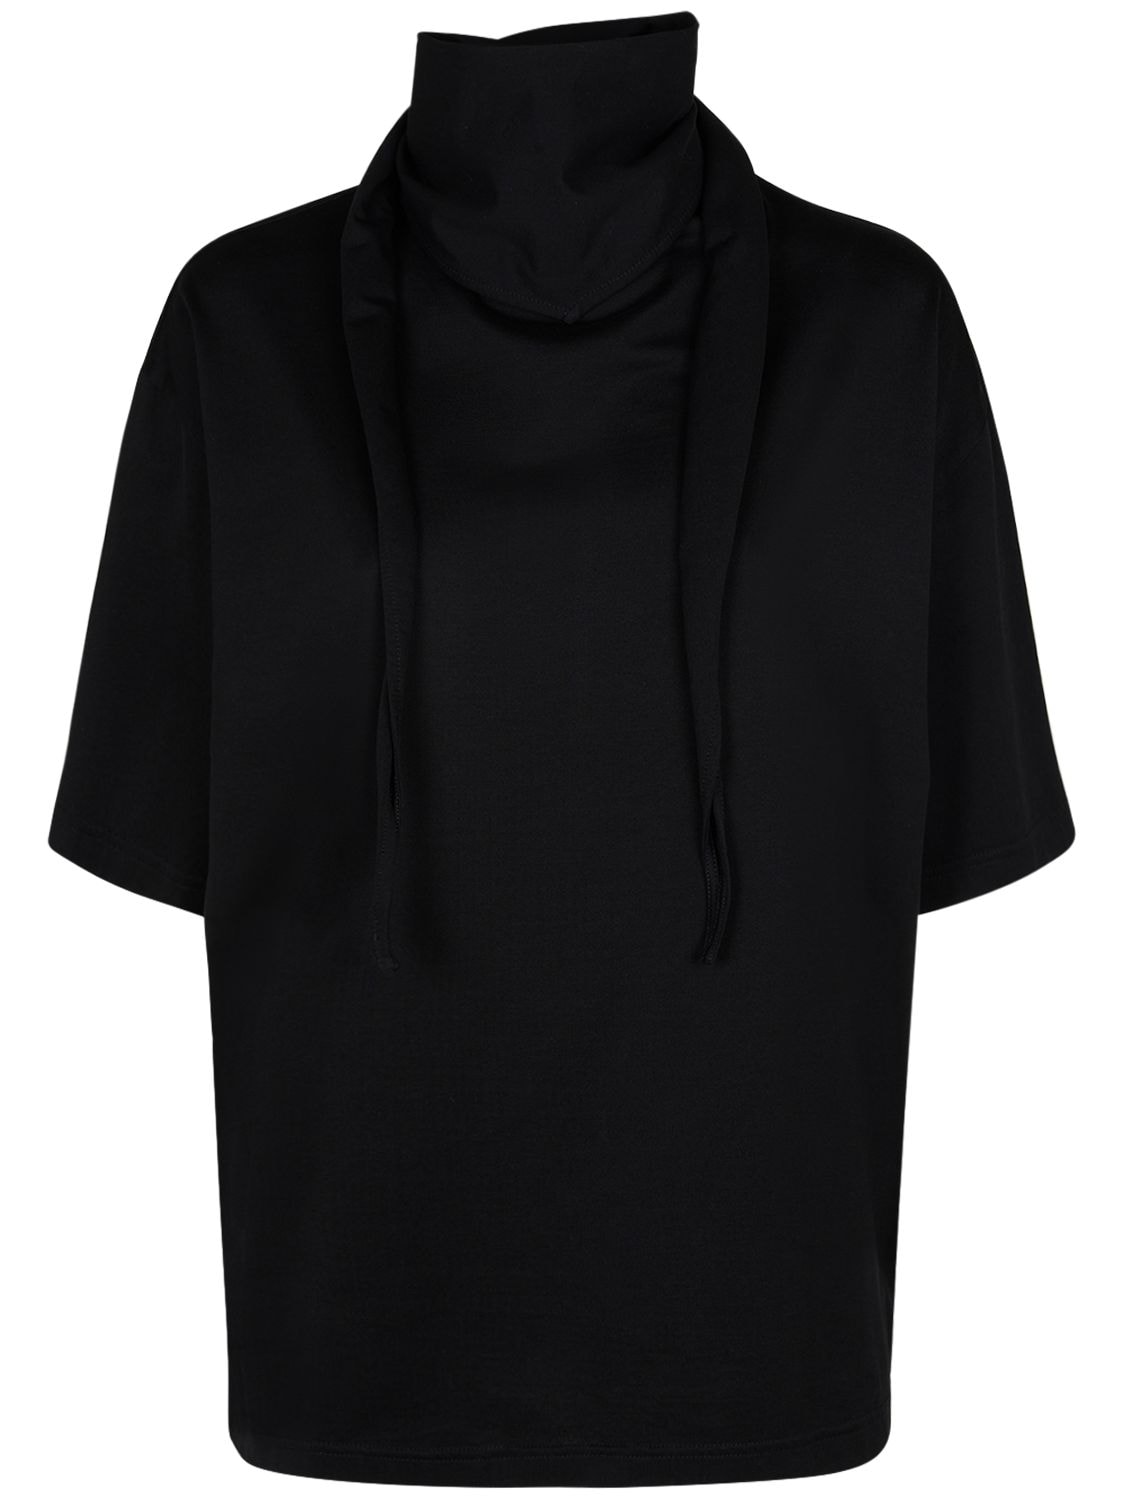 Image of Cotton T-shirt W/ Scarf